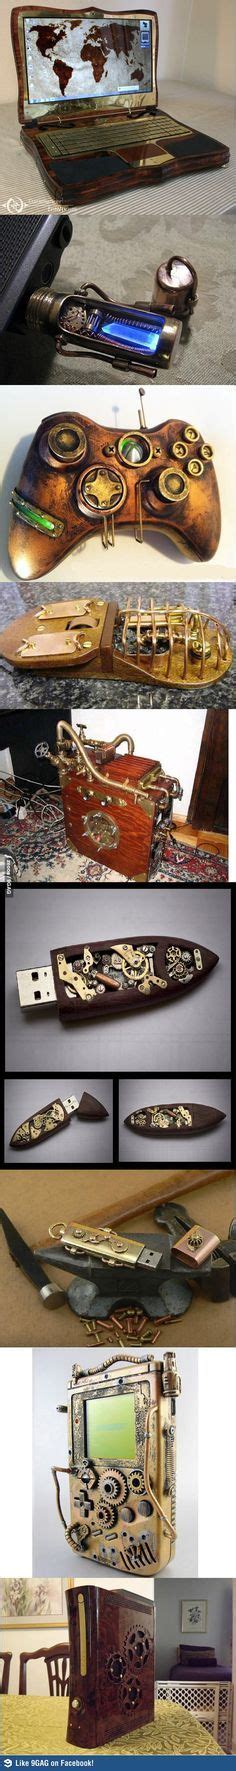 Steampunk art steam steampunk gadgets inventions dieselpunk cool gadgets steampunk steampunk gadgets <3 i blame bioshock and dishonored for creating my love of anything. Steampunk gadgets - you know you want one | Steampunk accessories, Steampunk diy, Steampunk gadgets